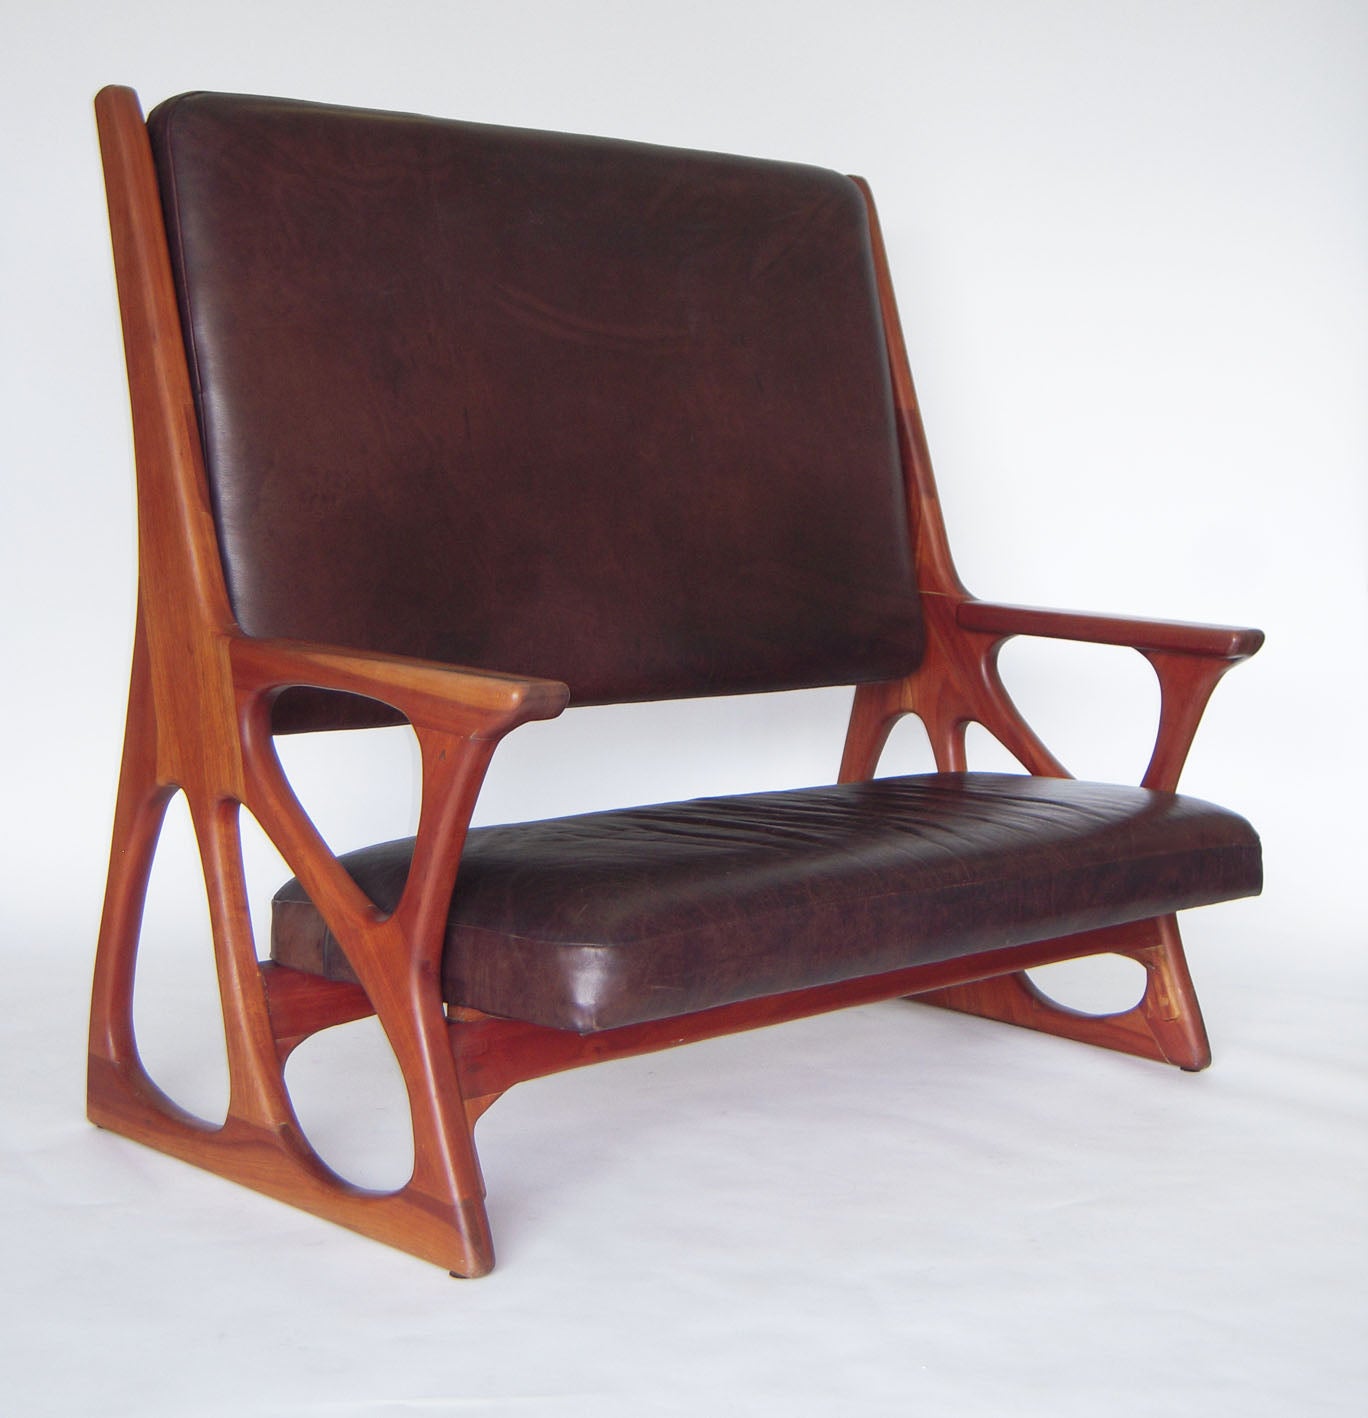 Studio Wood and Leather Settee or Bench after Powell, 1960s